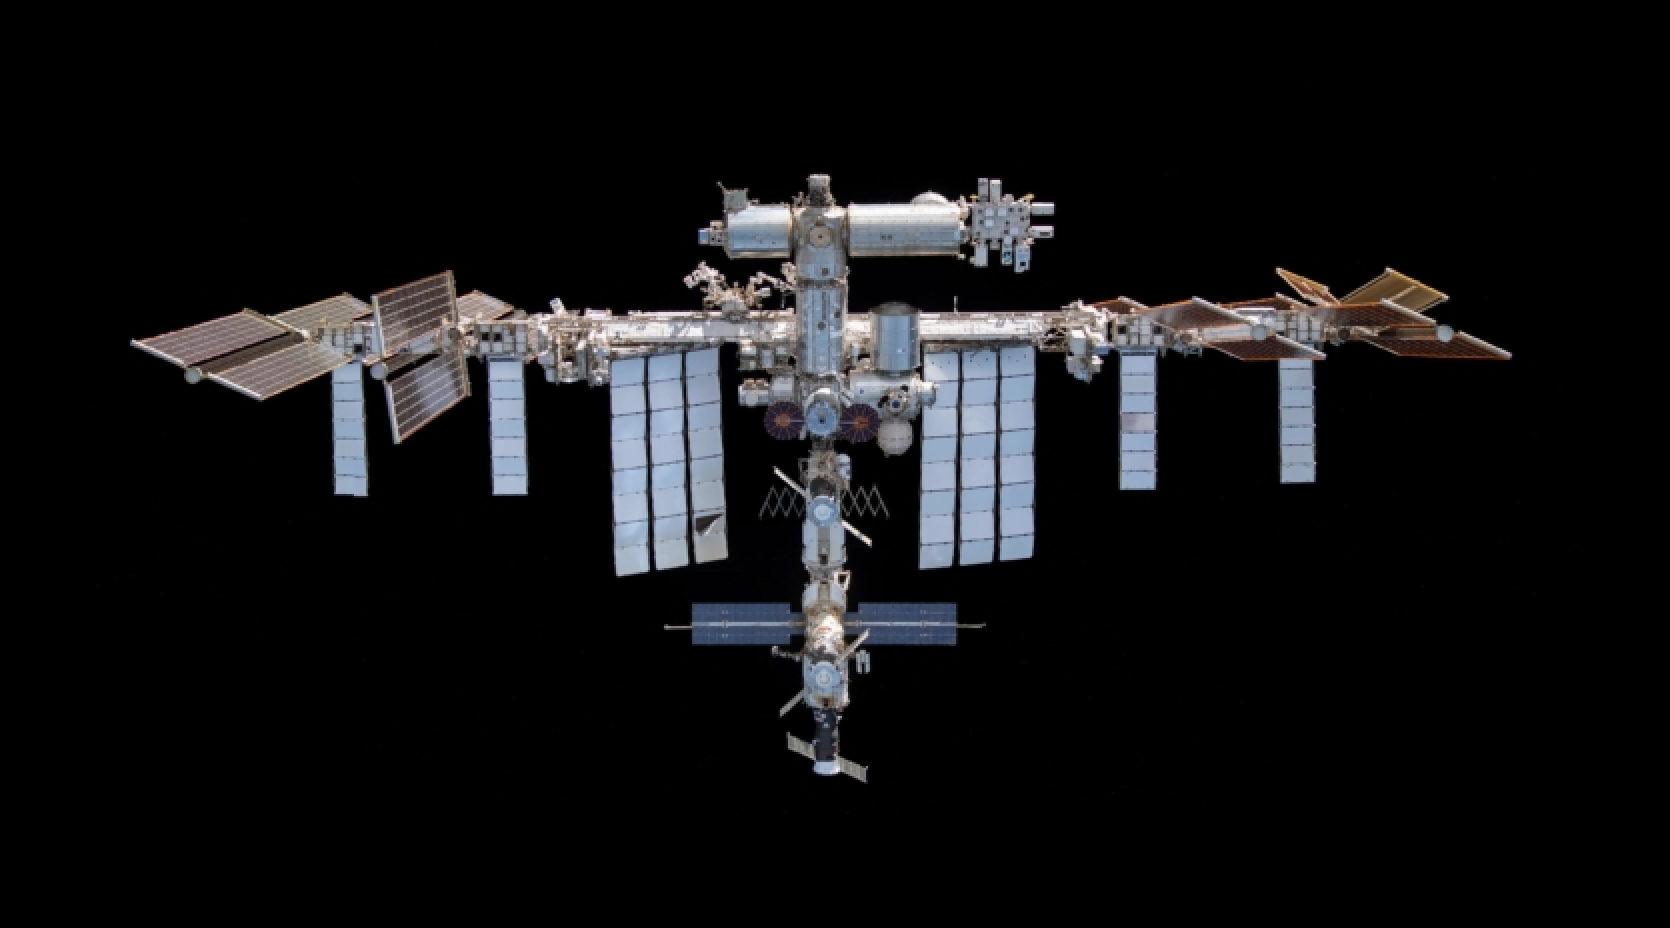 SpaceX will create a spacecraft that will "recycle" the ISS in 2030